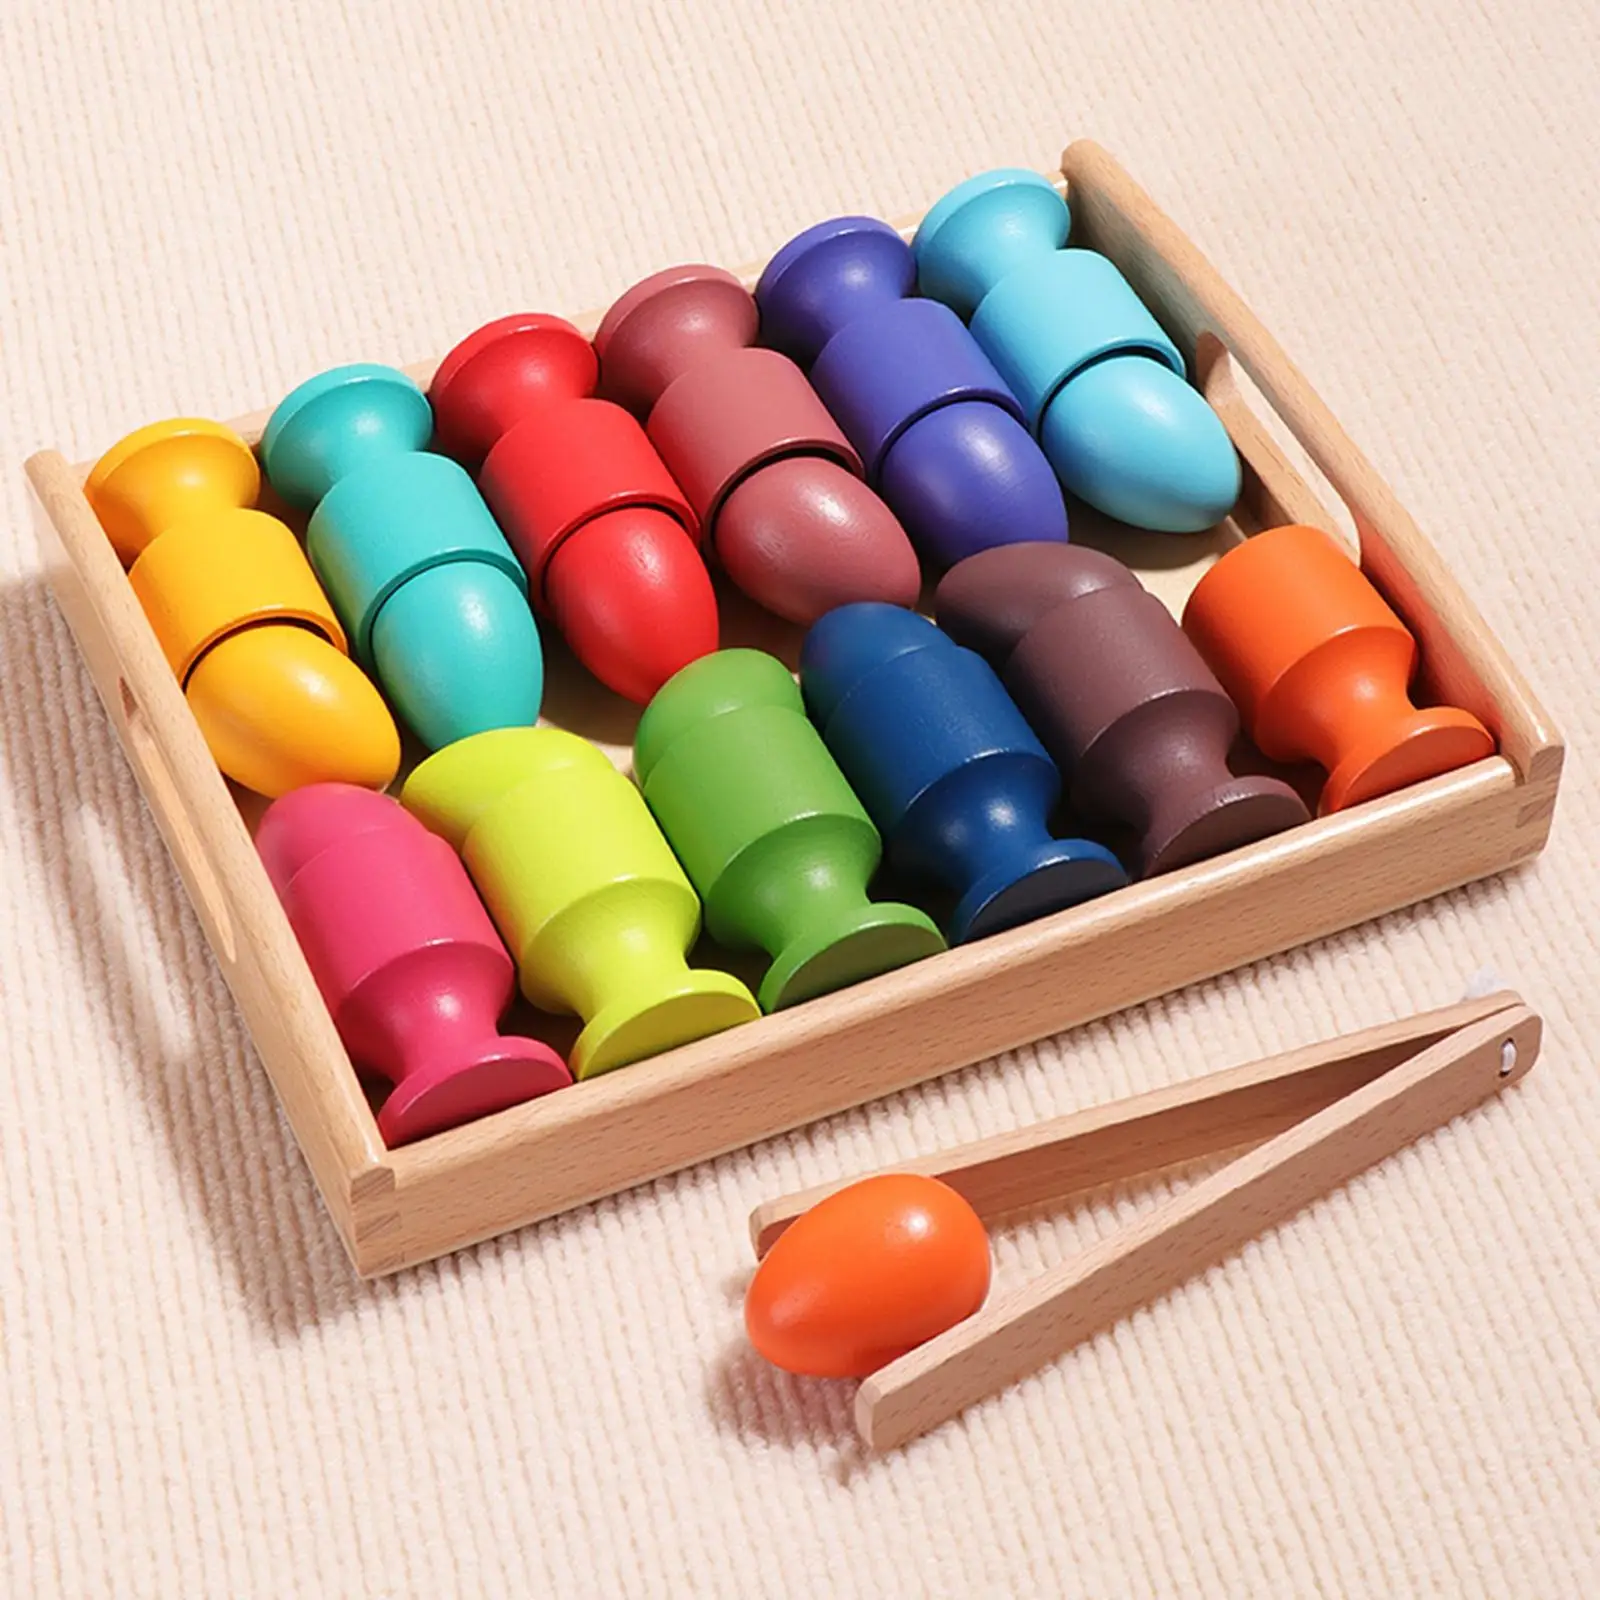 Montessori Color Recognition Fine Motor Wooden Sorter Game Egg Balls in Cups for Toddlers Kids Baby Children Counting Toys